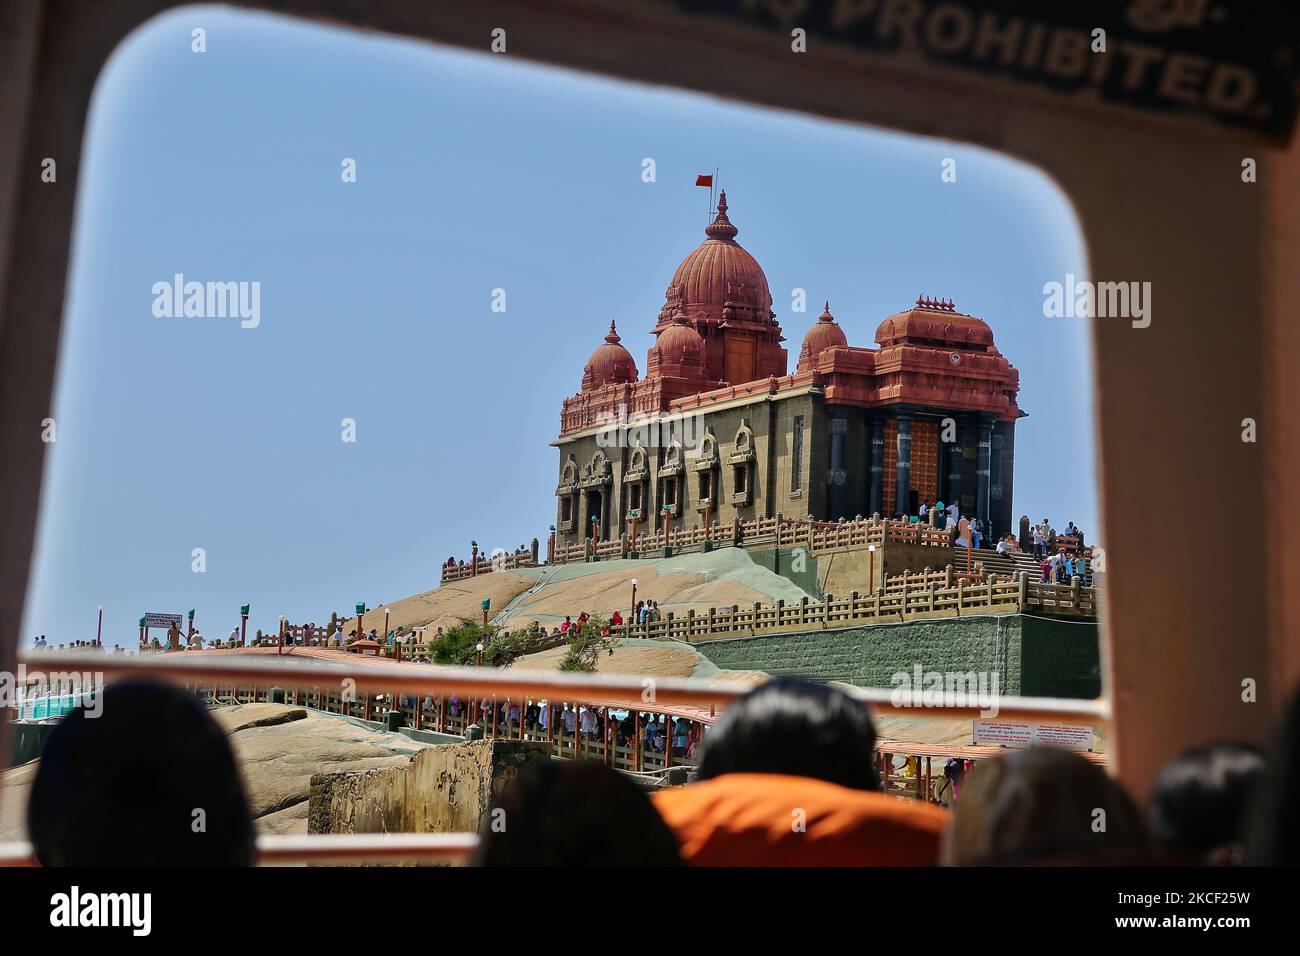 Passengers on a ferry boat look out towards the Vivekananda Rock Memorial Temple in Kanyakumari, Tamil Nadu, India. The Vivekananda Rock Memorial was built in 1970 in honour of Swami Vivekananda who is said to have attained enlightenment on the rock. (Photo by Creative Touch Imaging Ltd./NurPhoto) Stock Photo